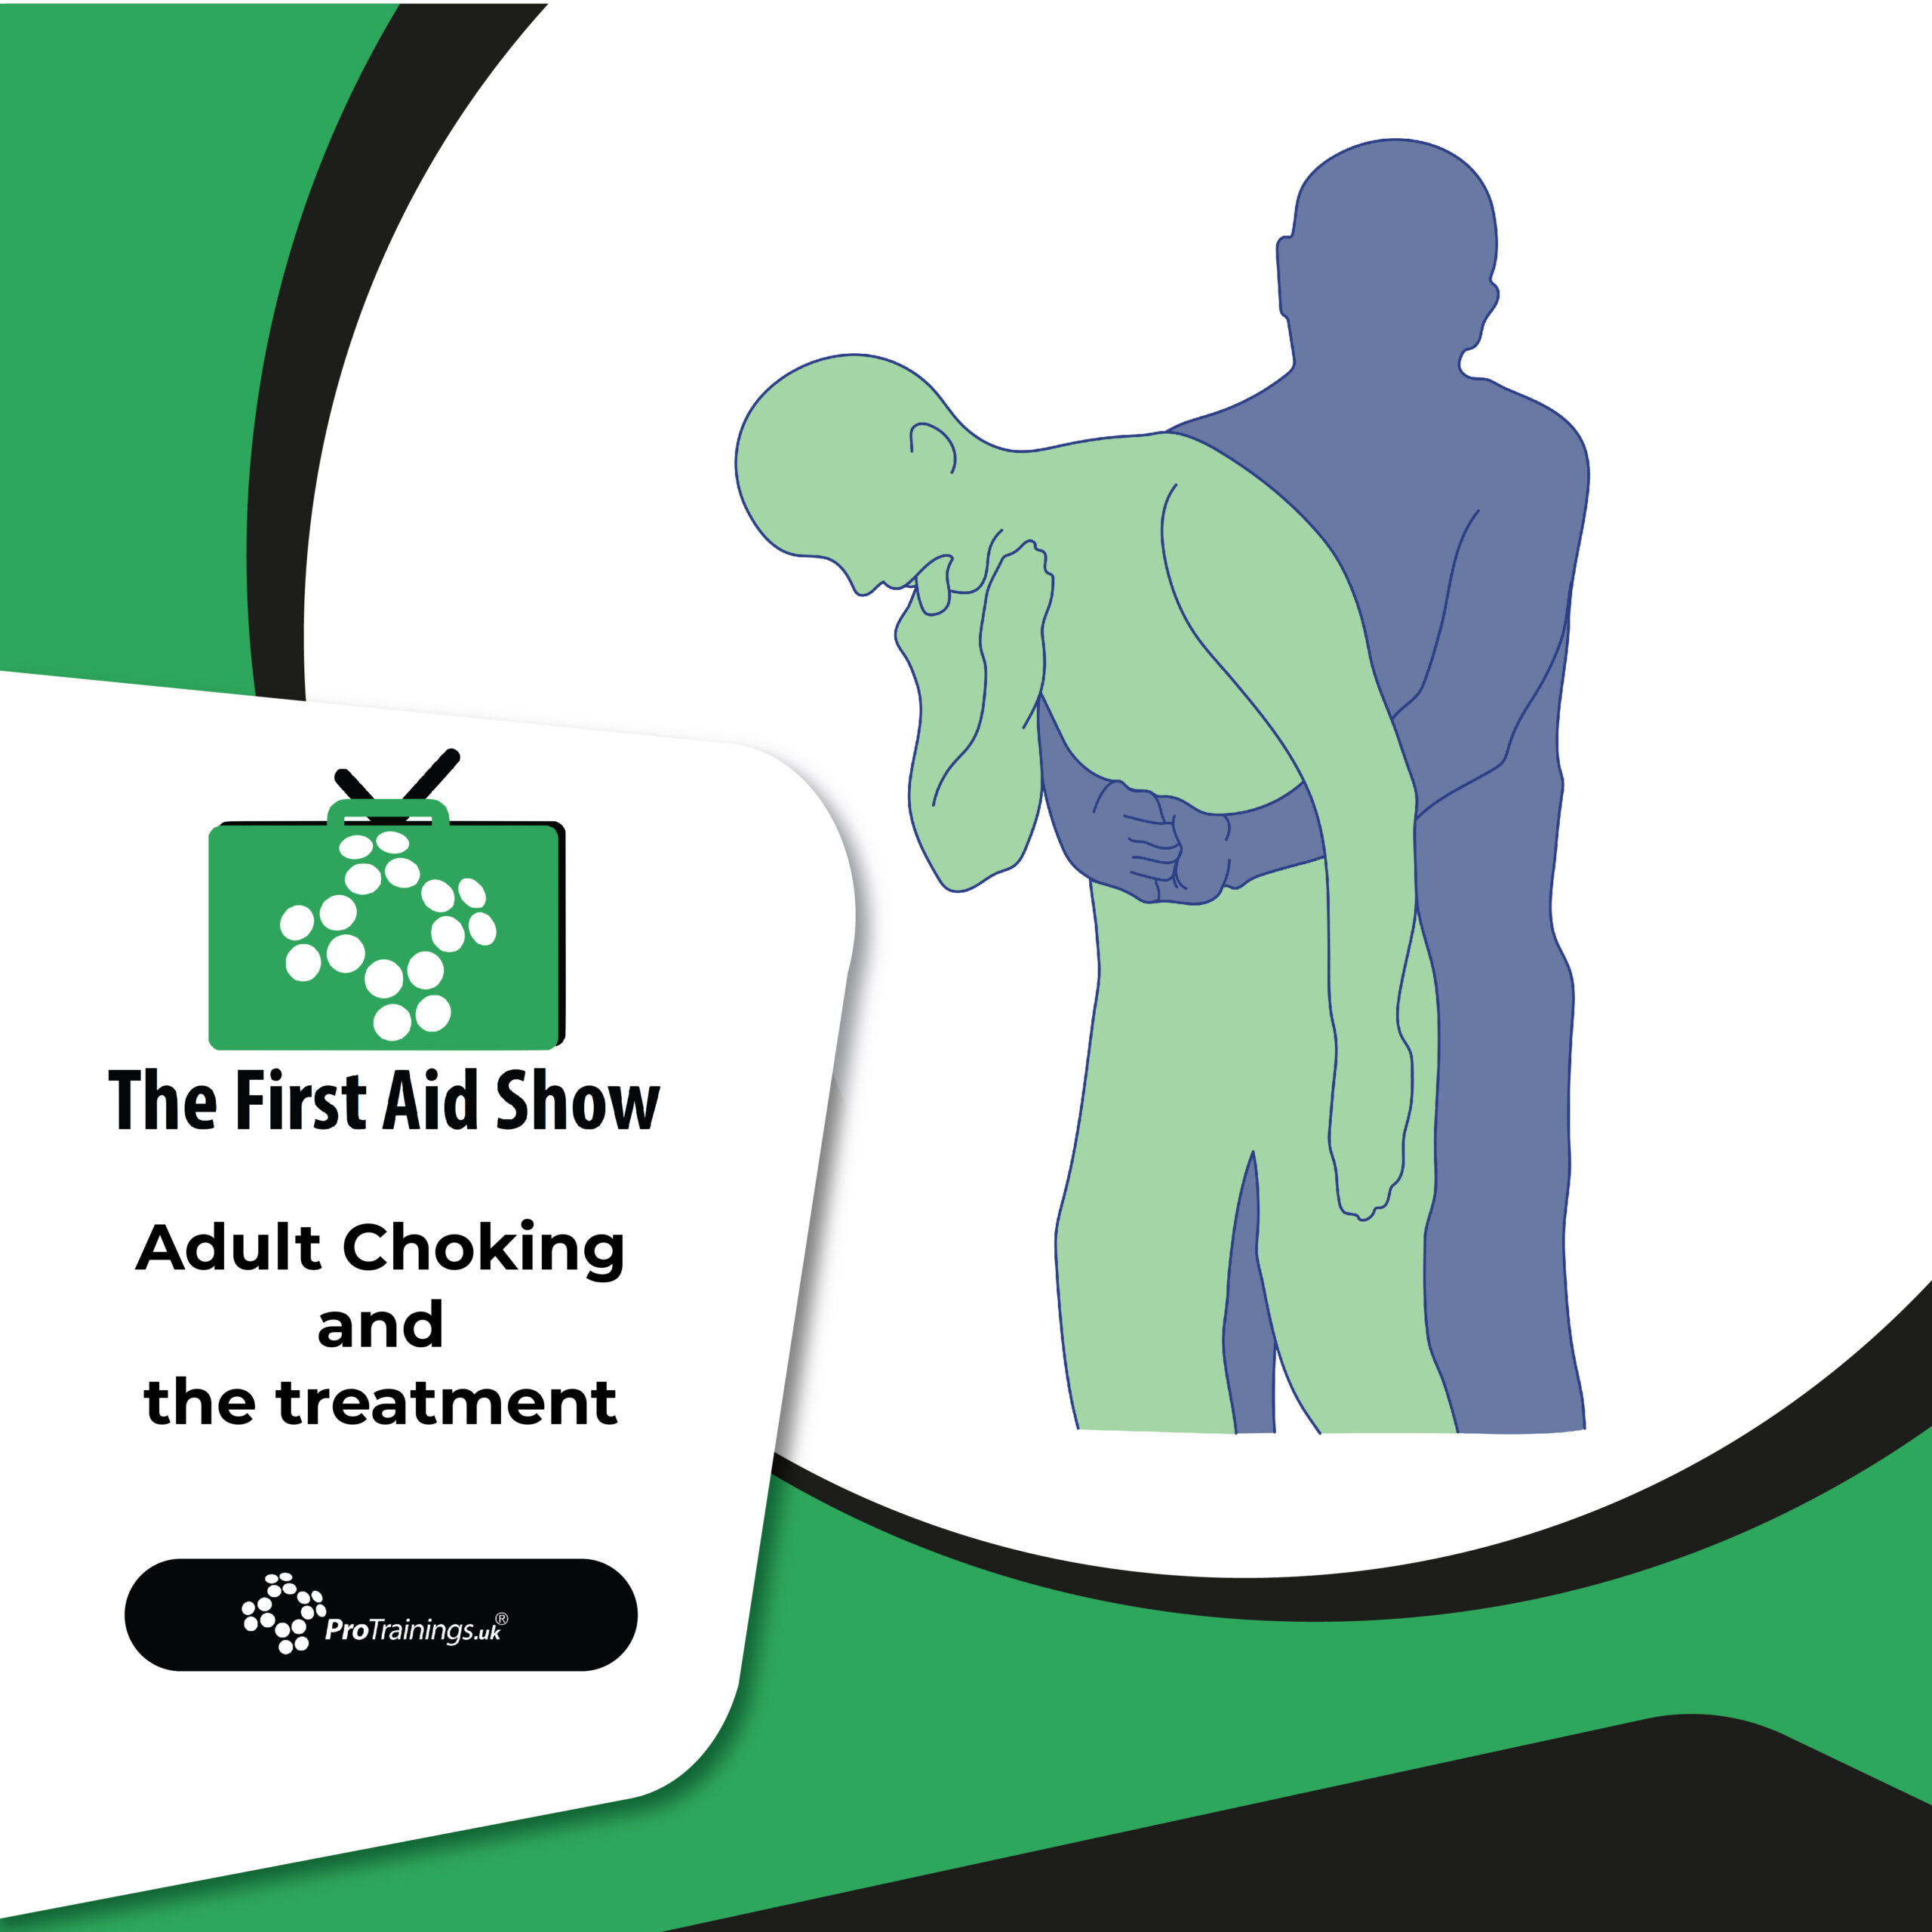 Treating choking in adults